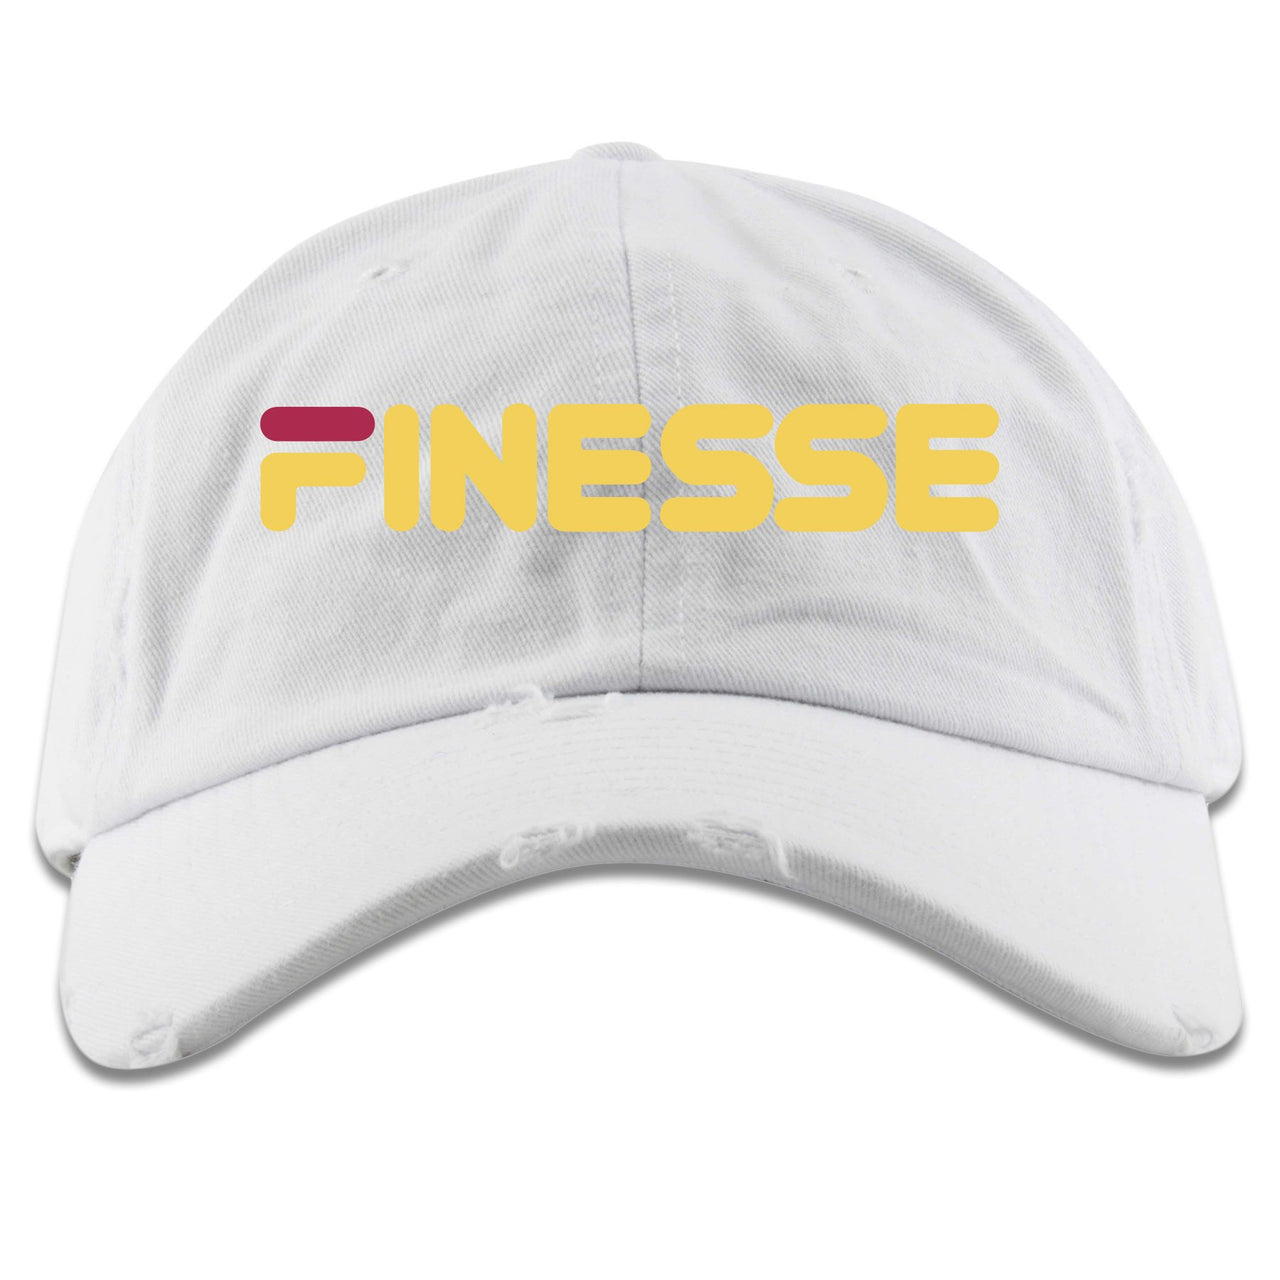 Varsity Maize Mid Blazers Distressed Dad Hat Finesse, White